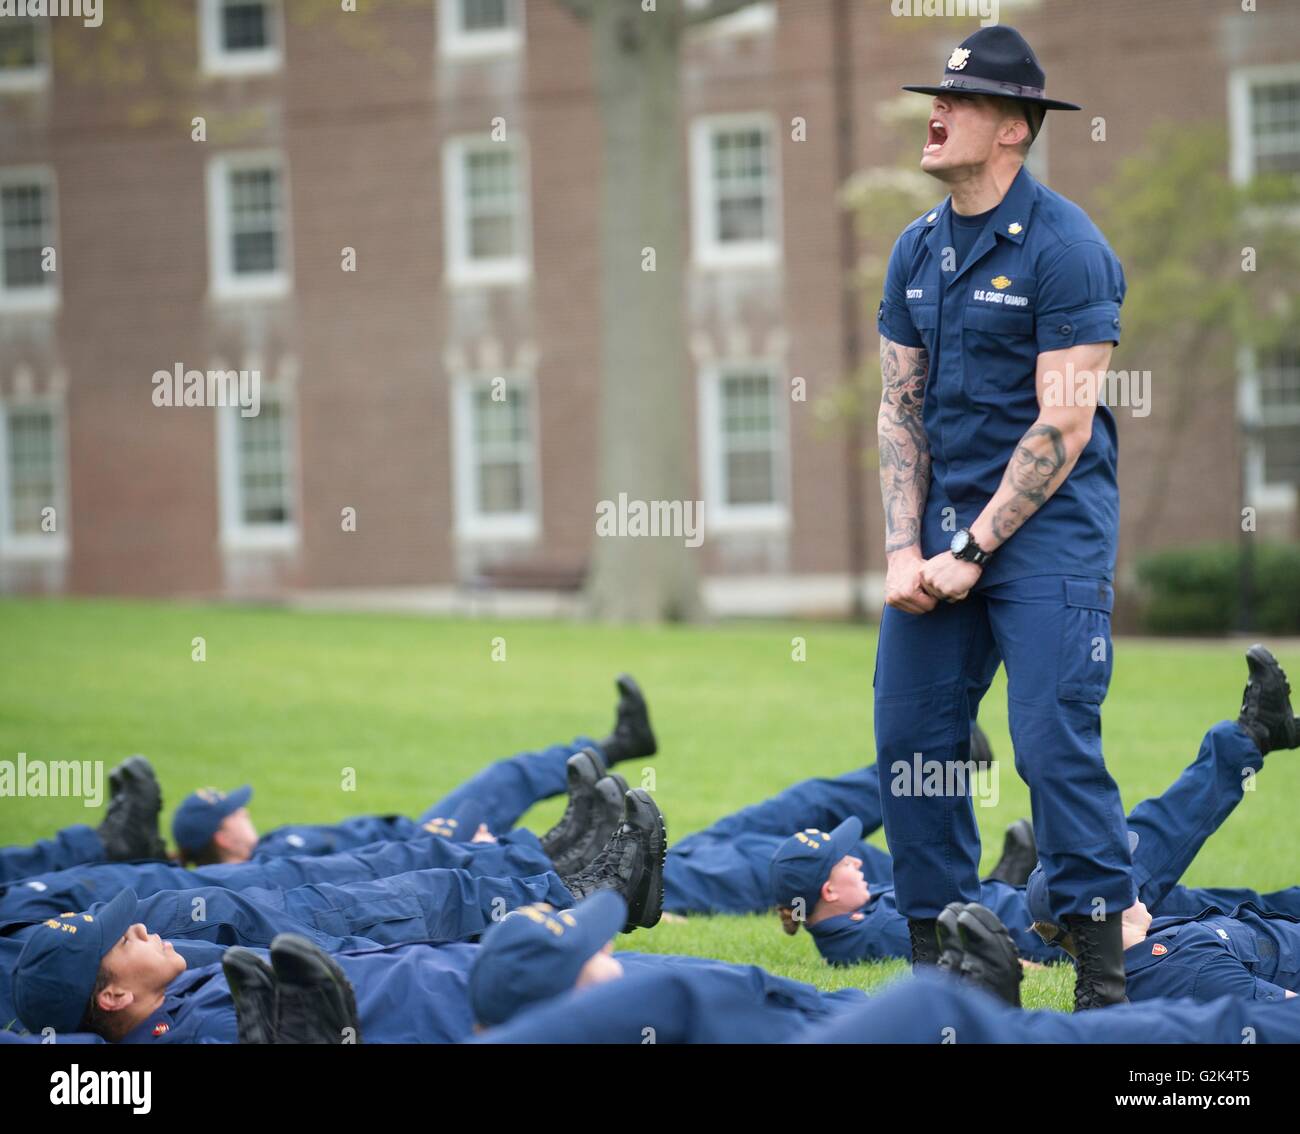 U.S. Coast Guard participate in a week-long training course with Cape May Recruit Company Commanders during 100th Week at the U.S. Coast Guard Academy May 9, 2016 in New London, Connecticut. Stock Photo